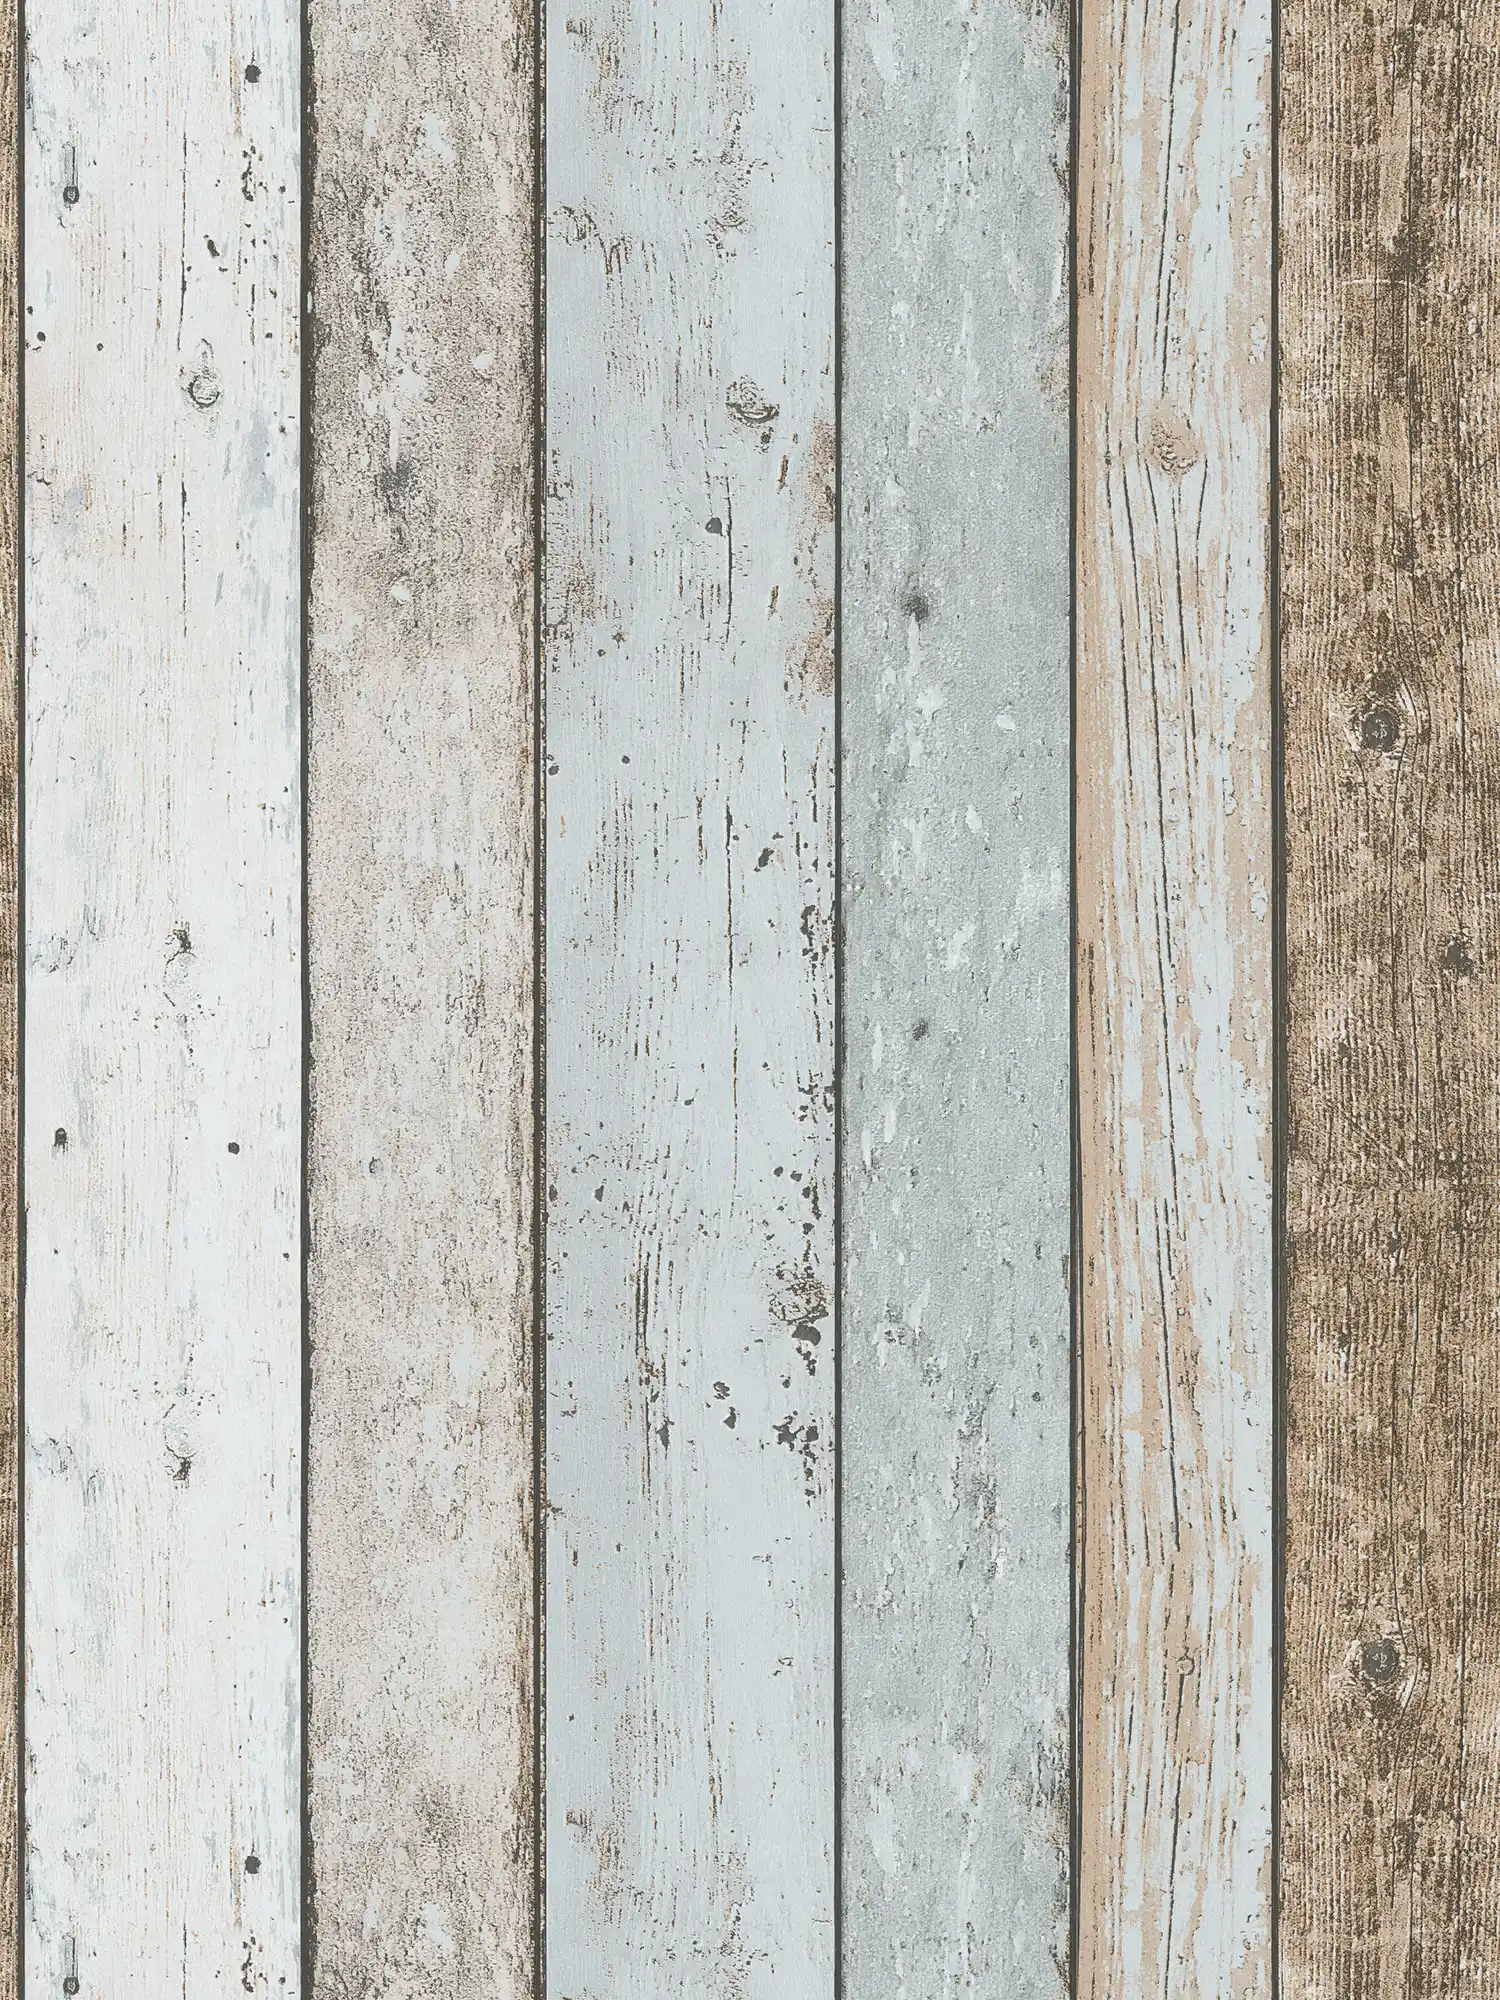 Wooden wallpaper shabby chic & boho style - blue, brown
